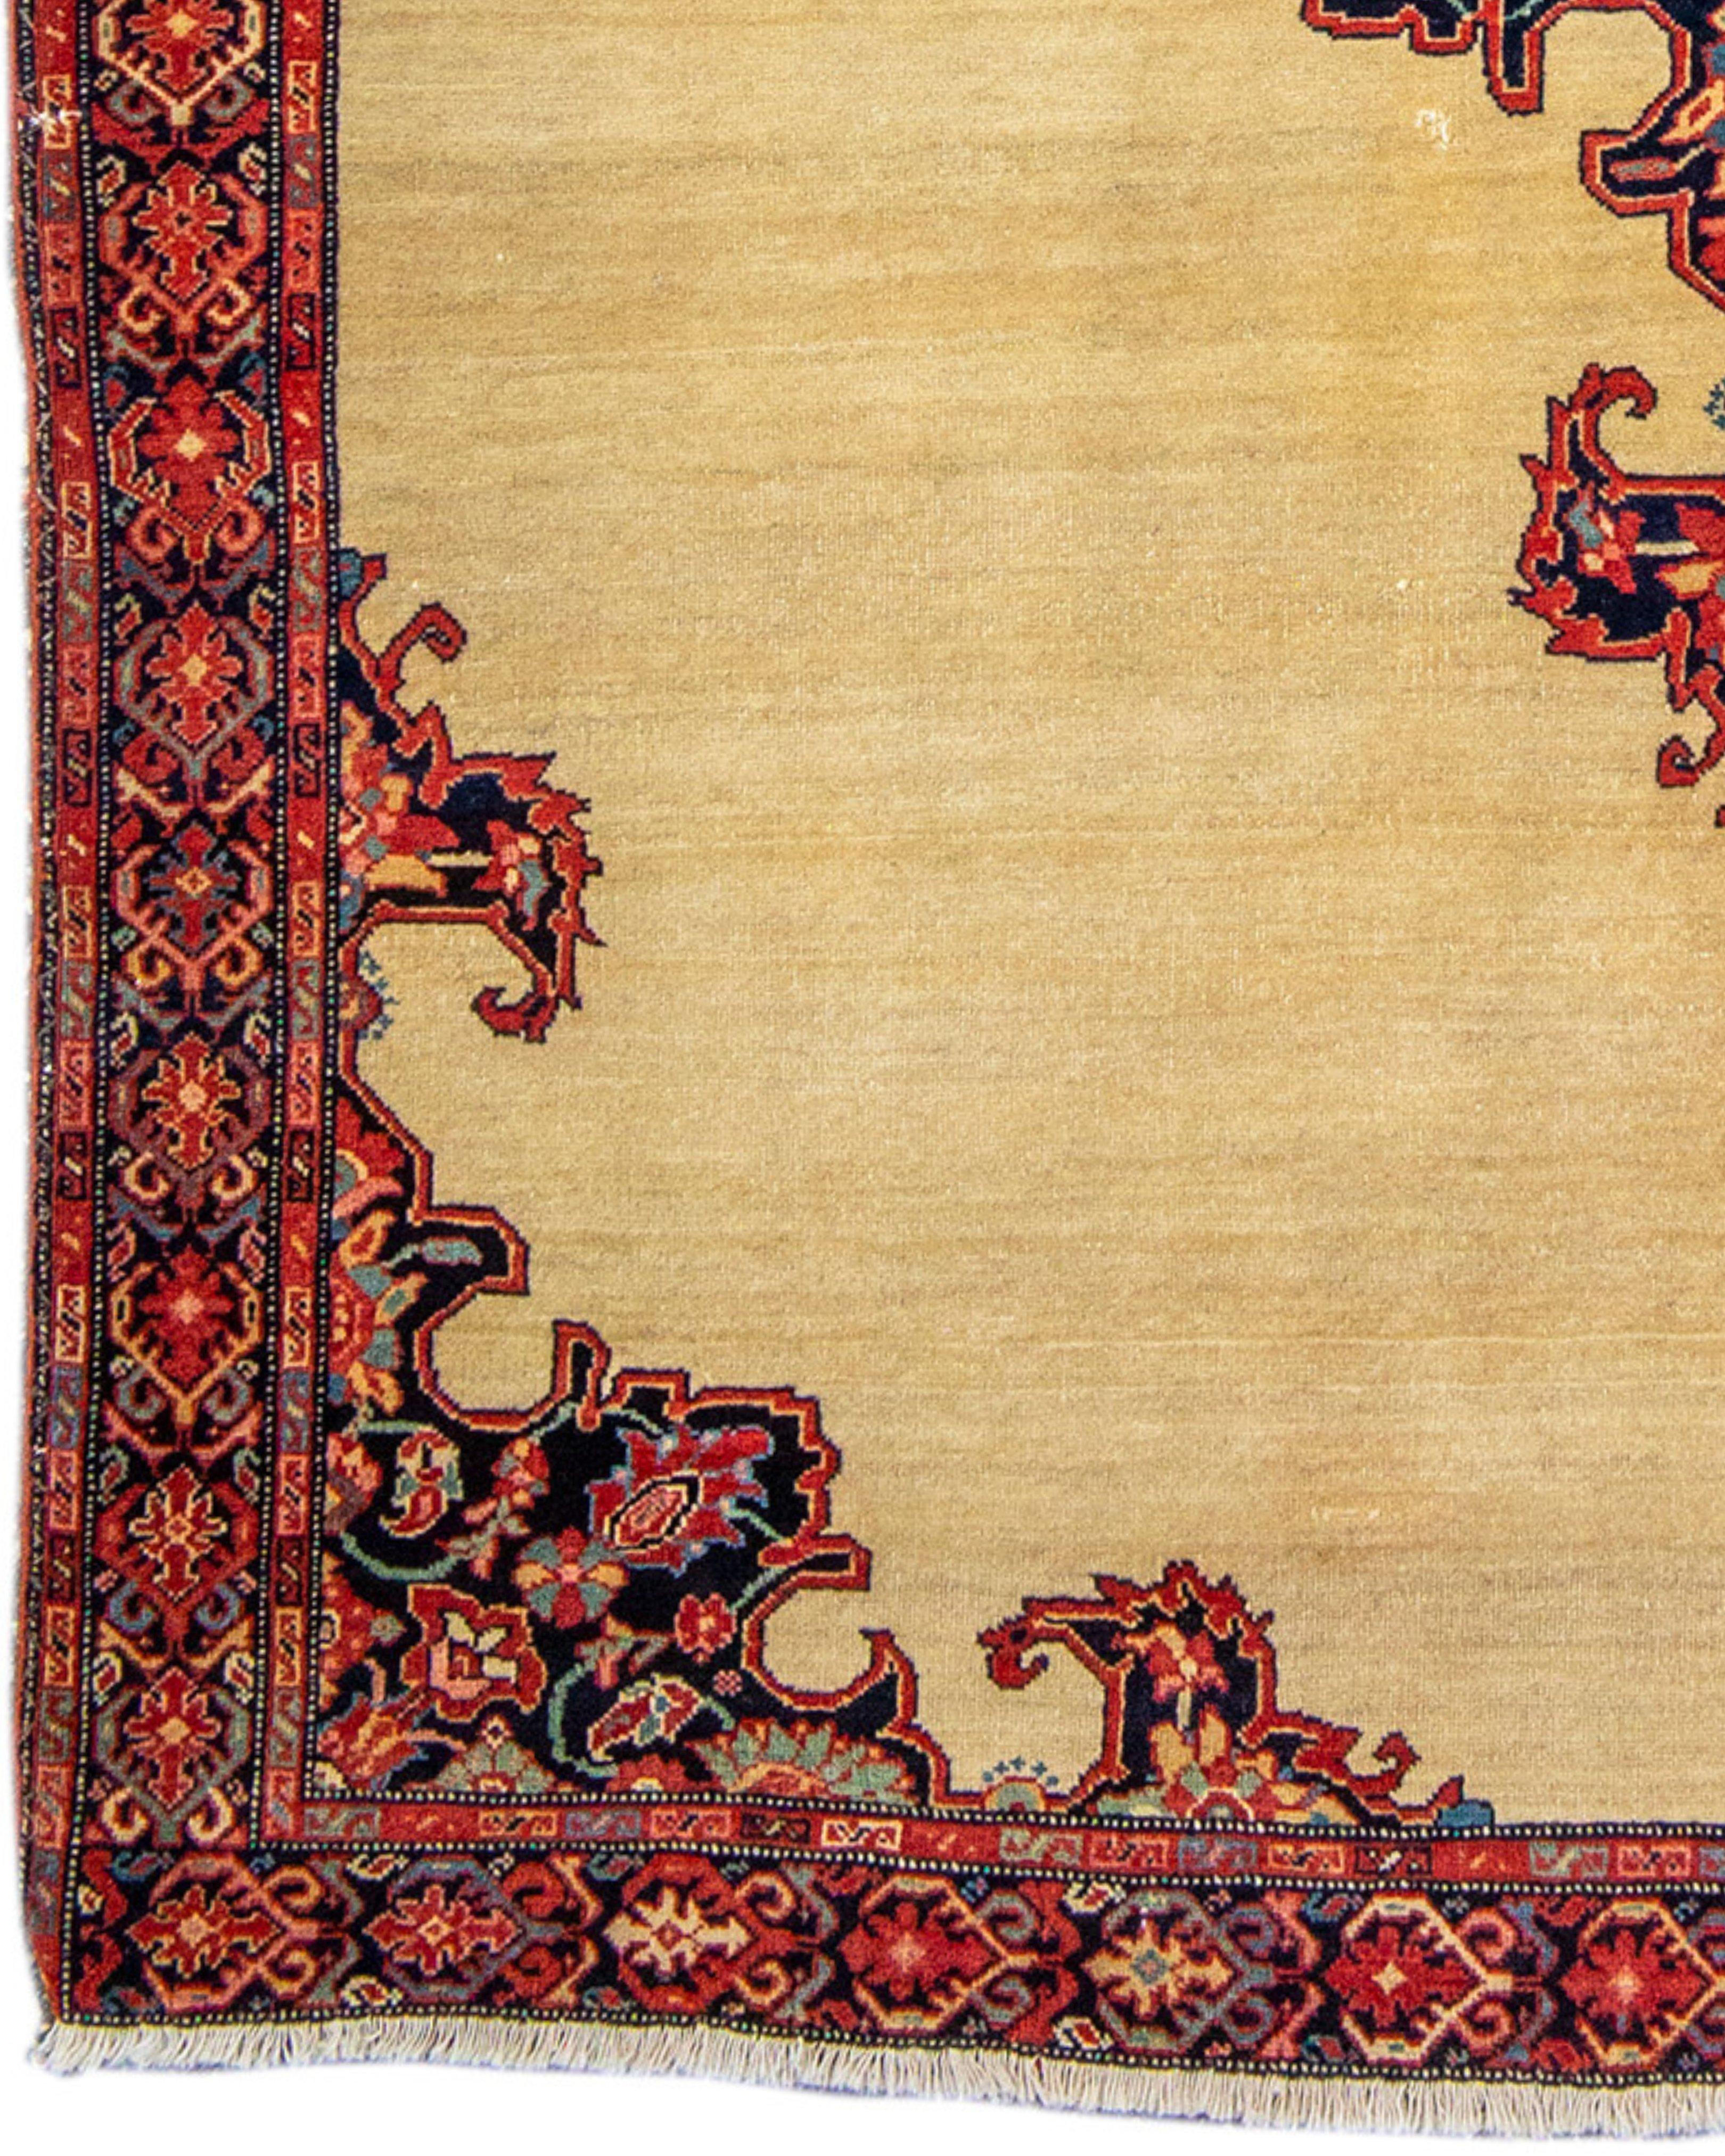 Hand-Knotted Antique Persian Fereghan Sarouk Rug, 19th Century For Sale